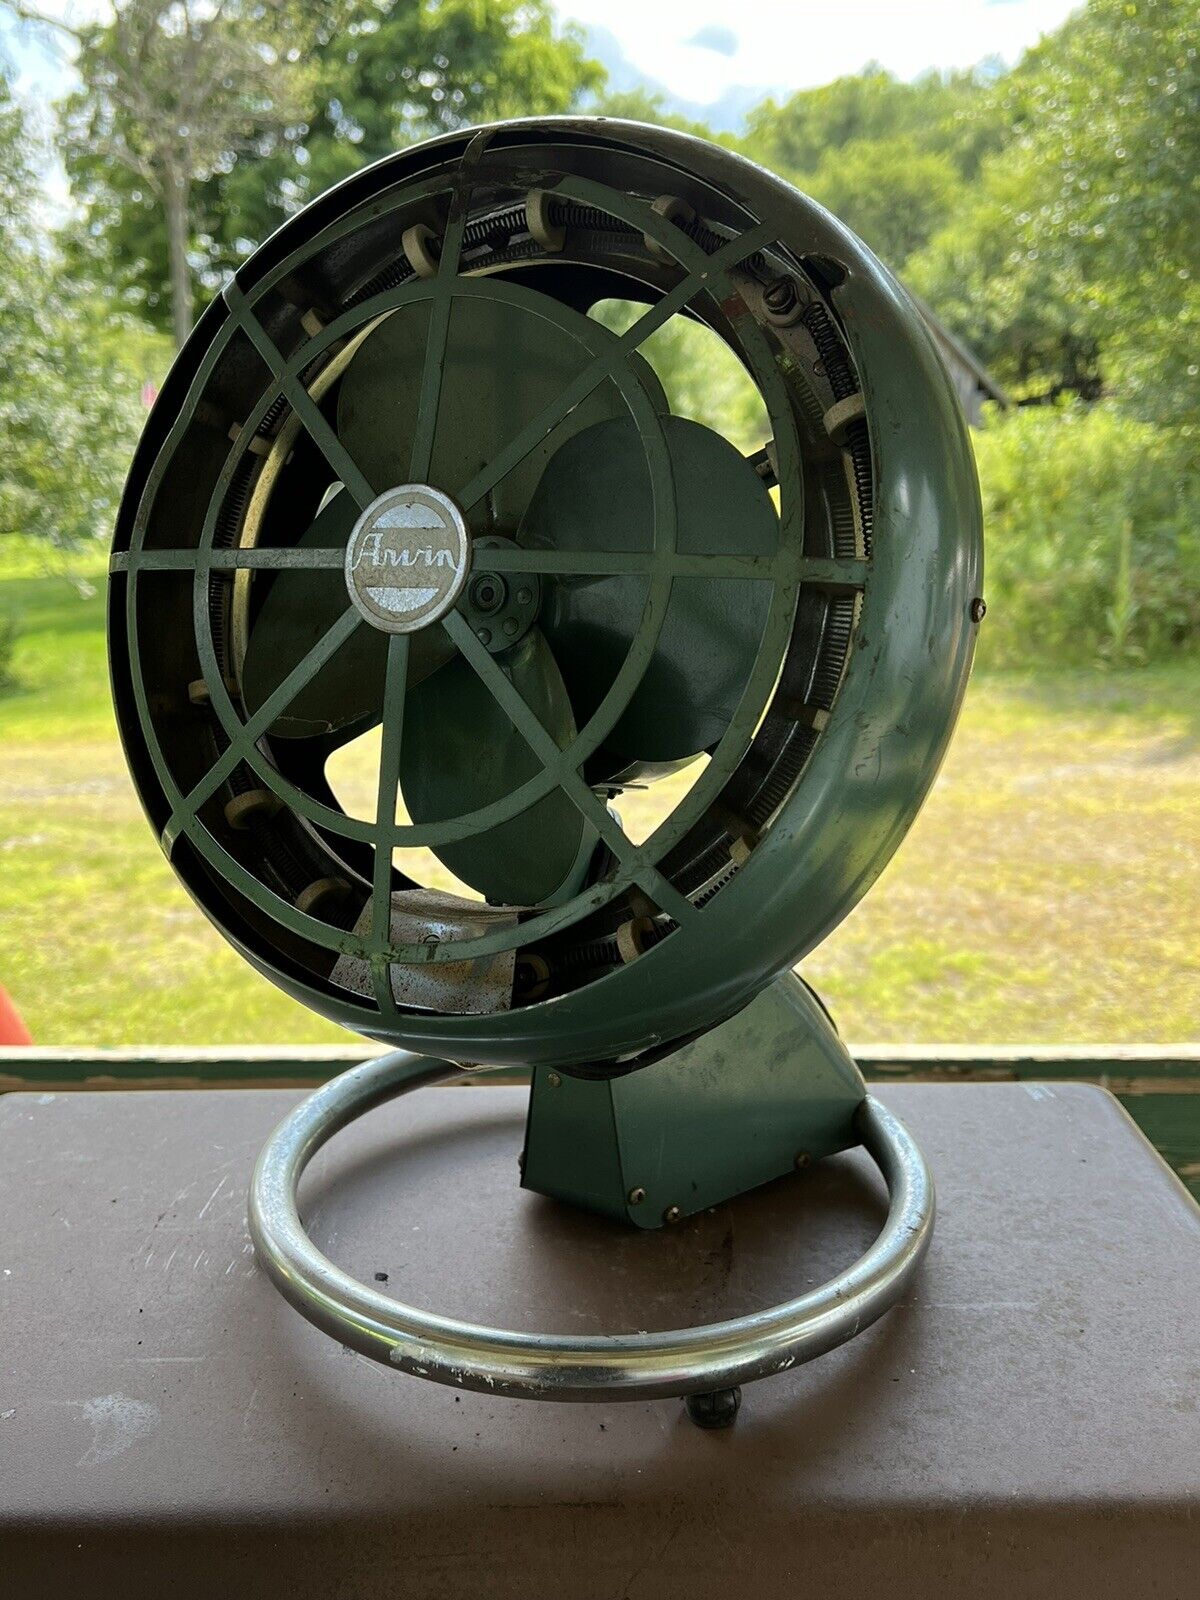 Arvin Model 5130 green round vintage 1950s' Fan / Heater - Tested - Works